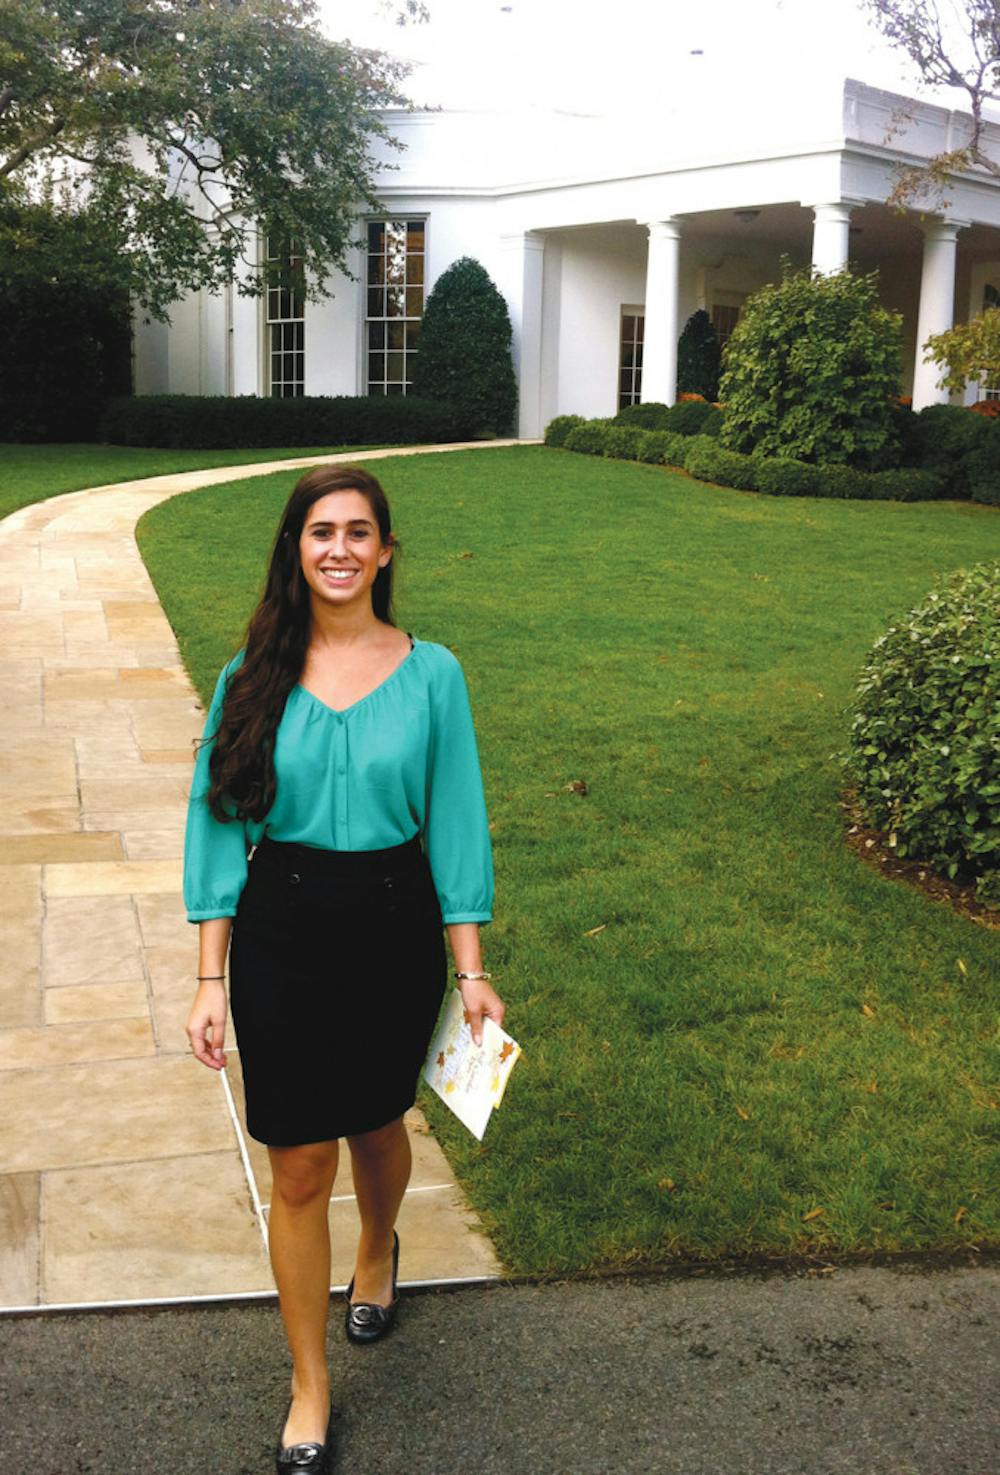 <p>UF student Shelley Greenspan interned at the White House. She worked in the Department of Presidential Personnel on the National Security team.</p>